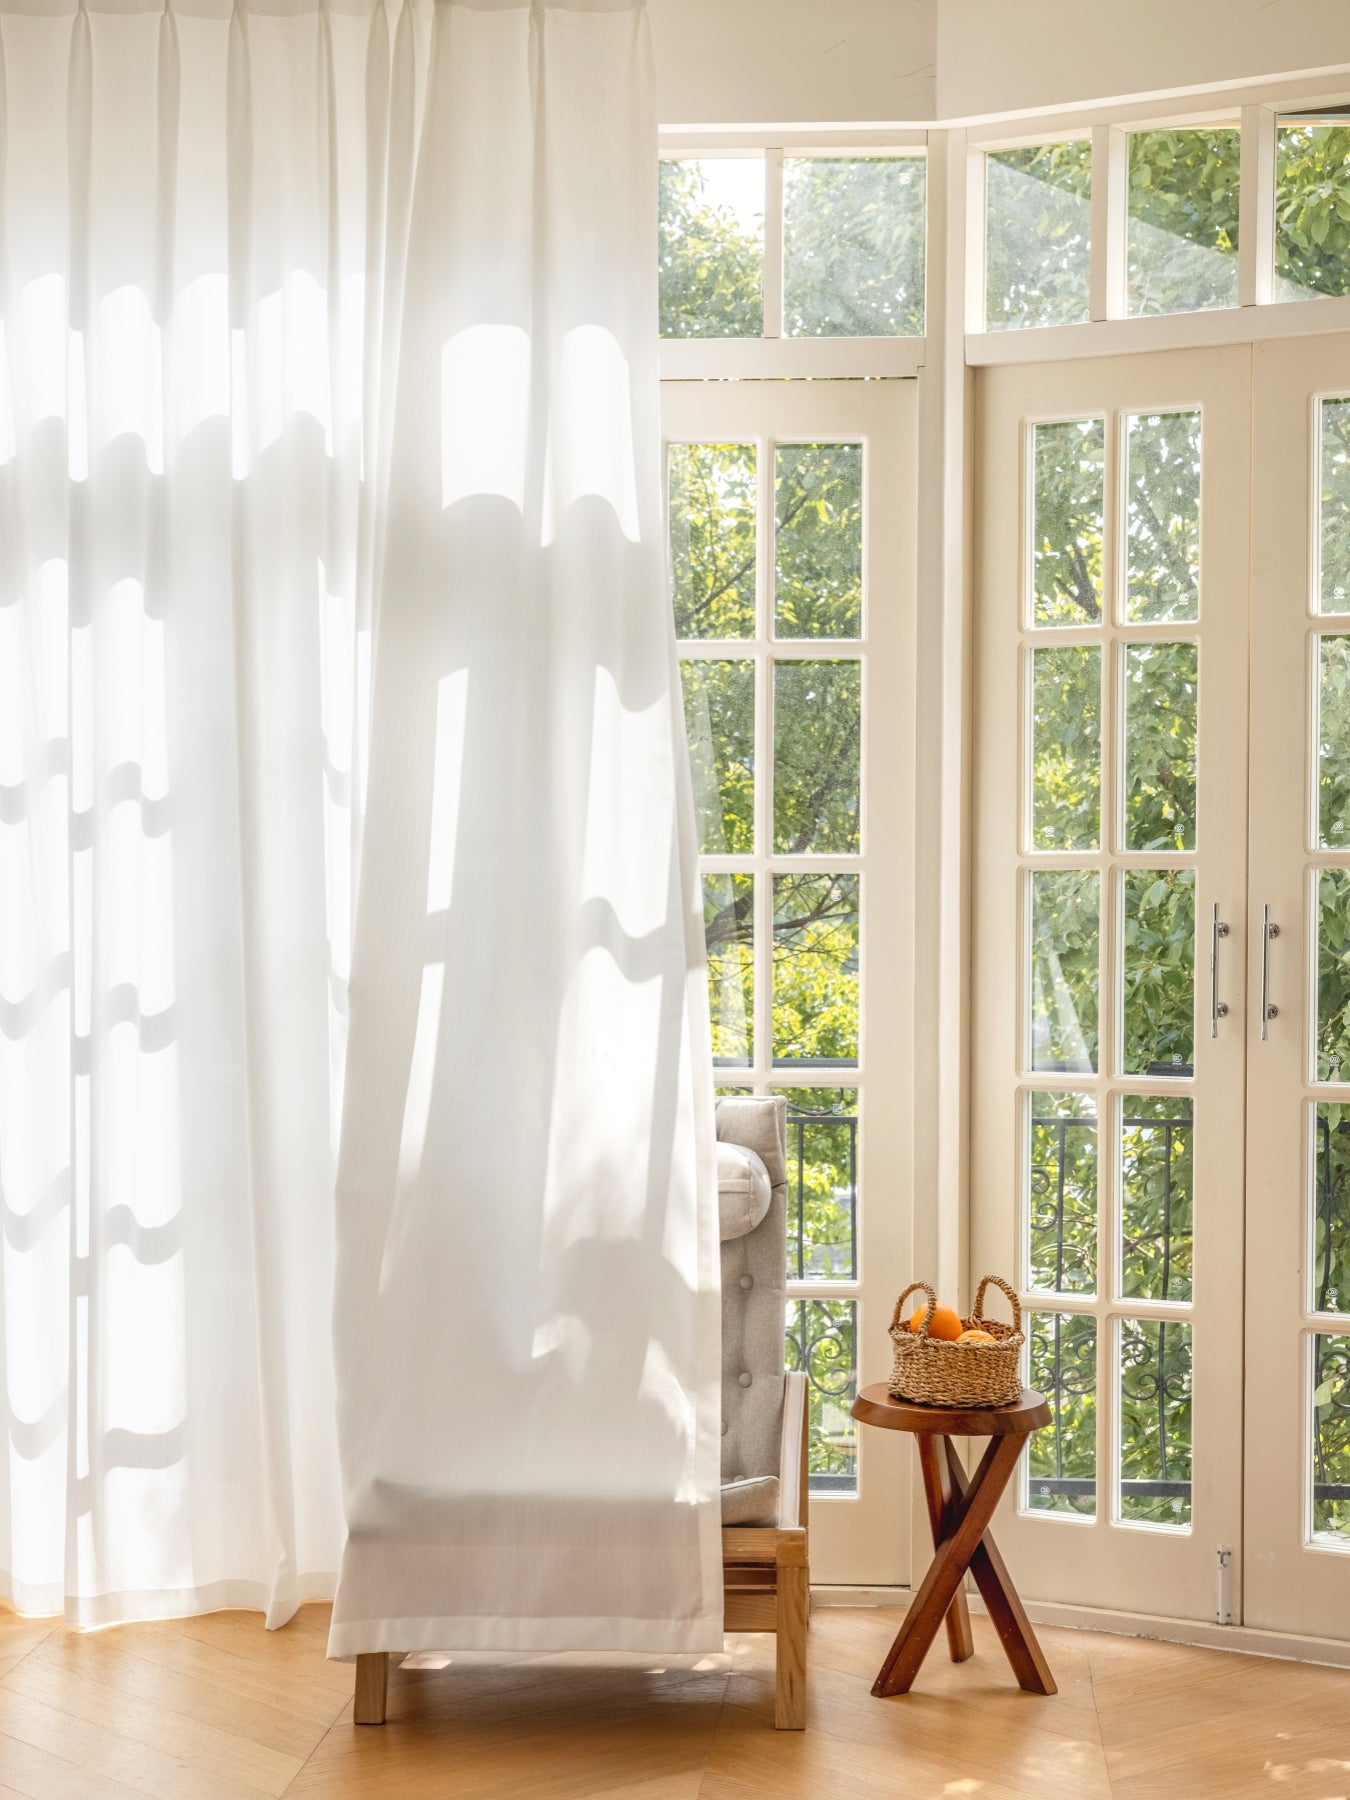 Elegant white sheer curtain filtering sunlight in a room with French doors and a wooden stool with towels, enhancing privacy and soft ambiance